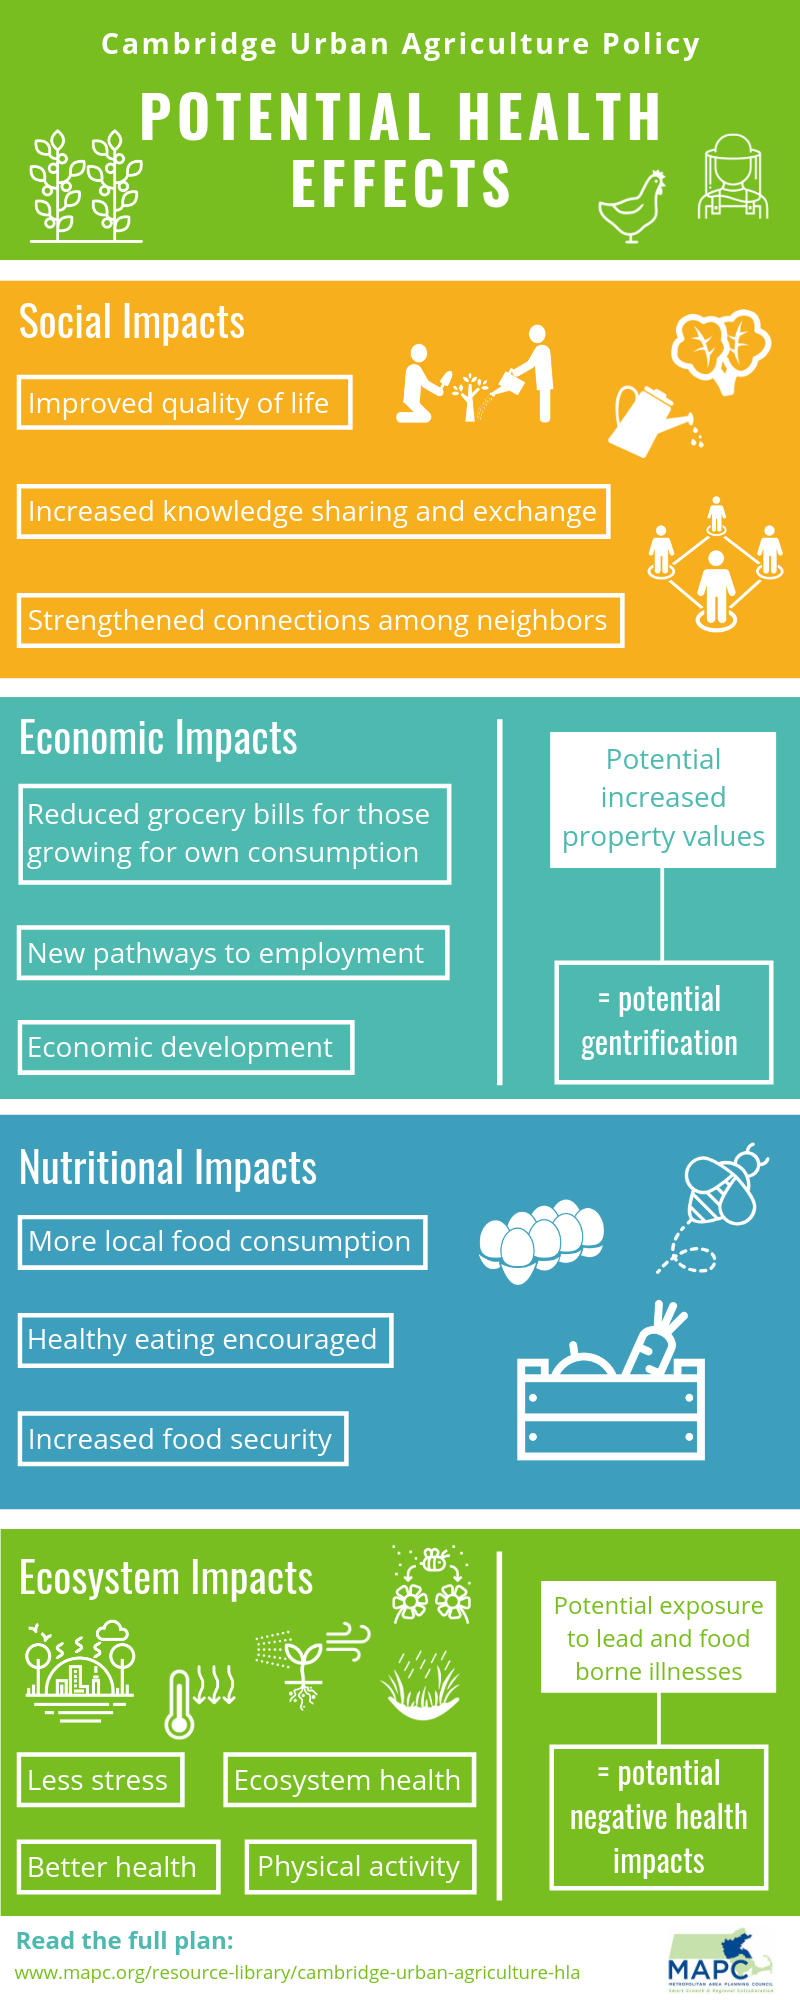 Infographic summarizing the potential health effects of the Cambridge Urban Agriculture policy